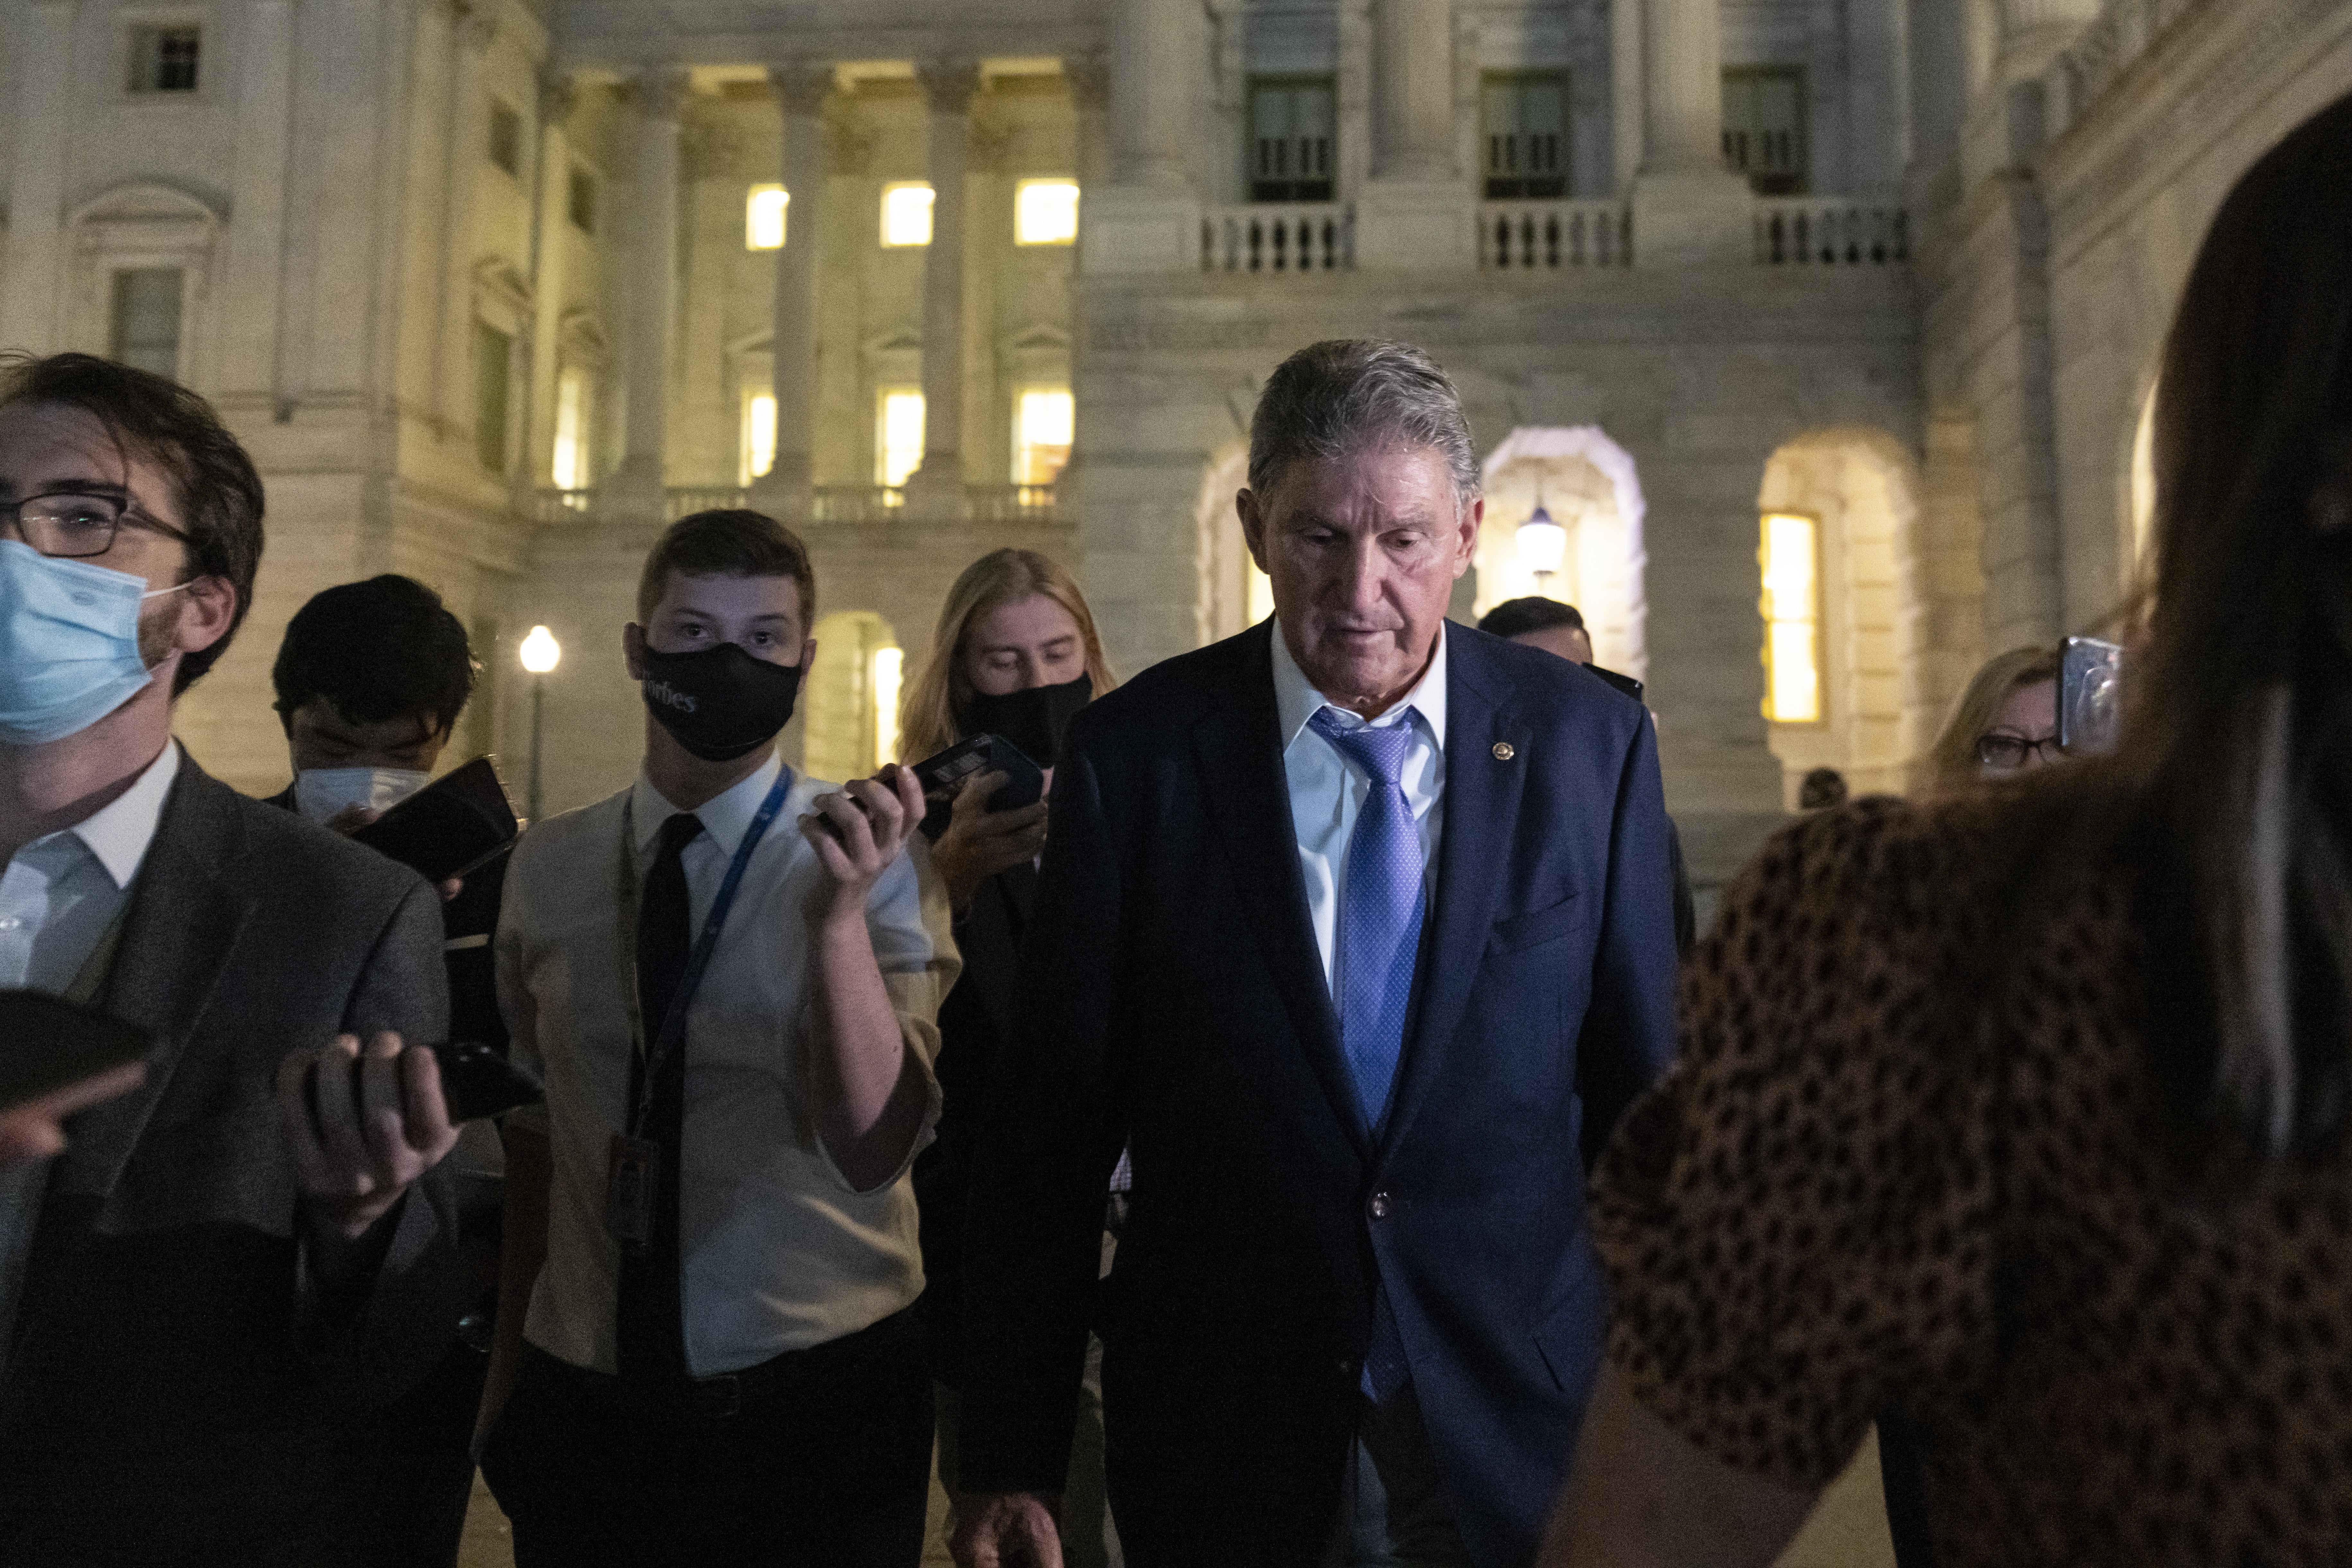 WASHINGTON, DC - SEPTEMBER 30: Sen. Joe Manchin (D-WV) exits the U.S. Capitol after meeting with White House officials September 30, 2021 in Washington, DC. Manchin has stated that he will not support a social policy spending package that goes over $1.5 trillion, at odds with the $3.5 trillion package supported by more liberal Democrats. (Photo by Drew Angerer/Getty Images)